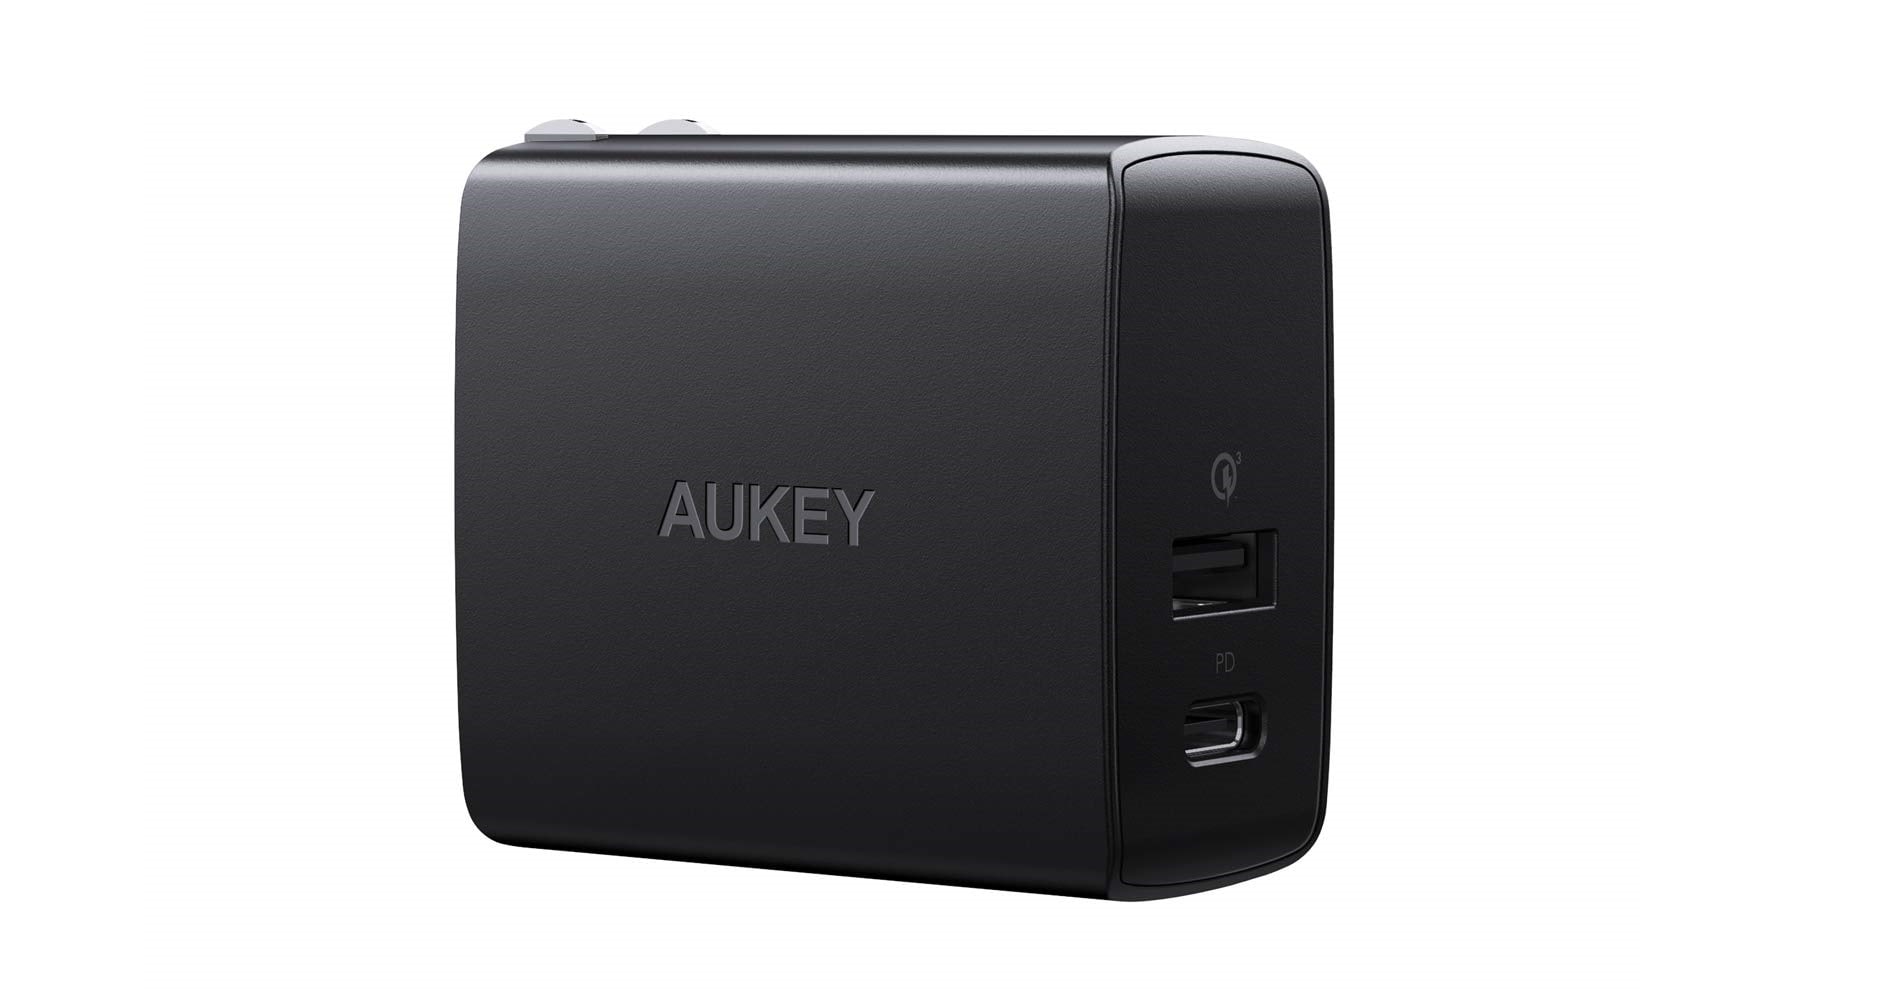 18W Aukey USB Wall Charger